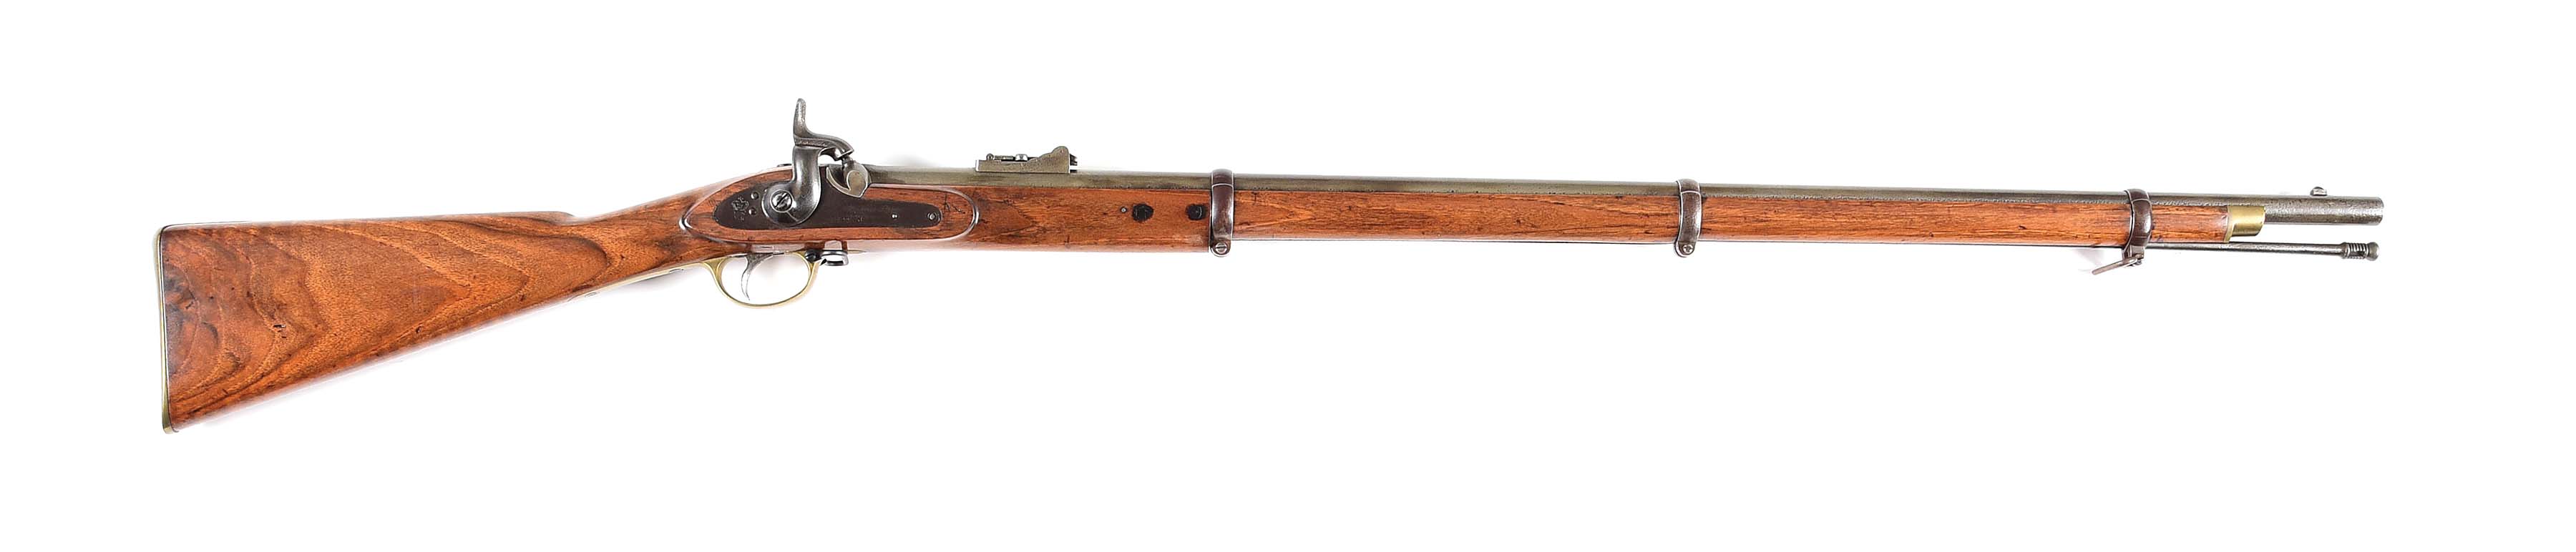 Image 1. (A) ENFIELD MODEL 1853 TOWER PERCUSSION RIFLE. 